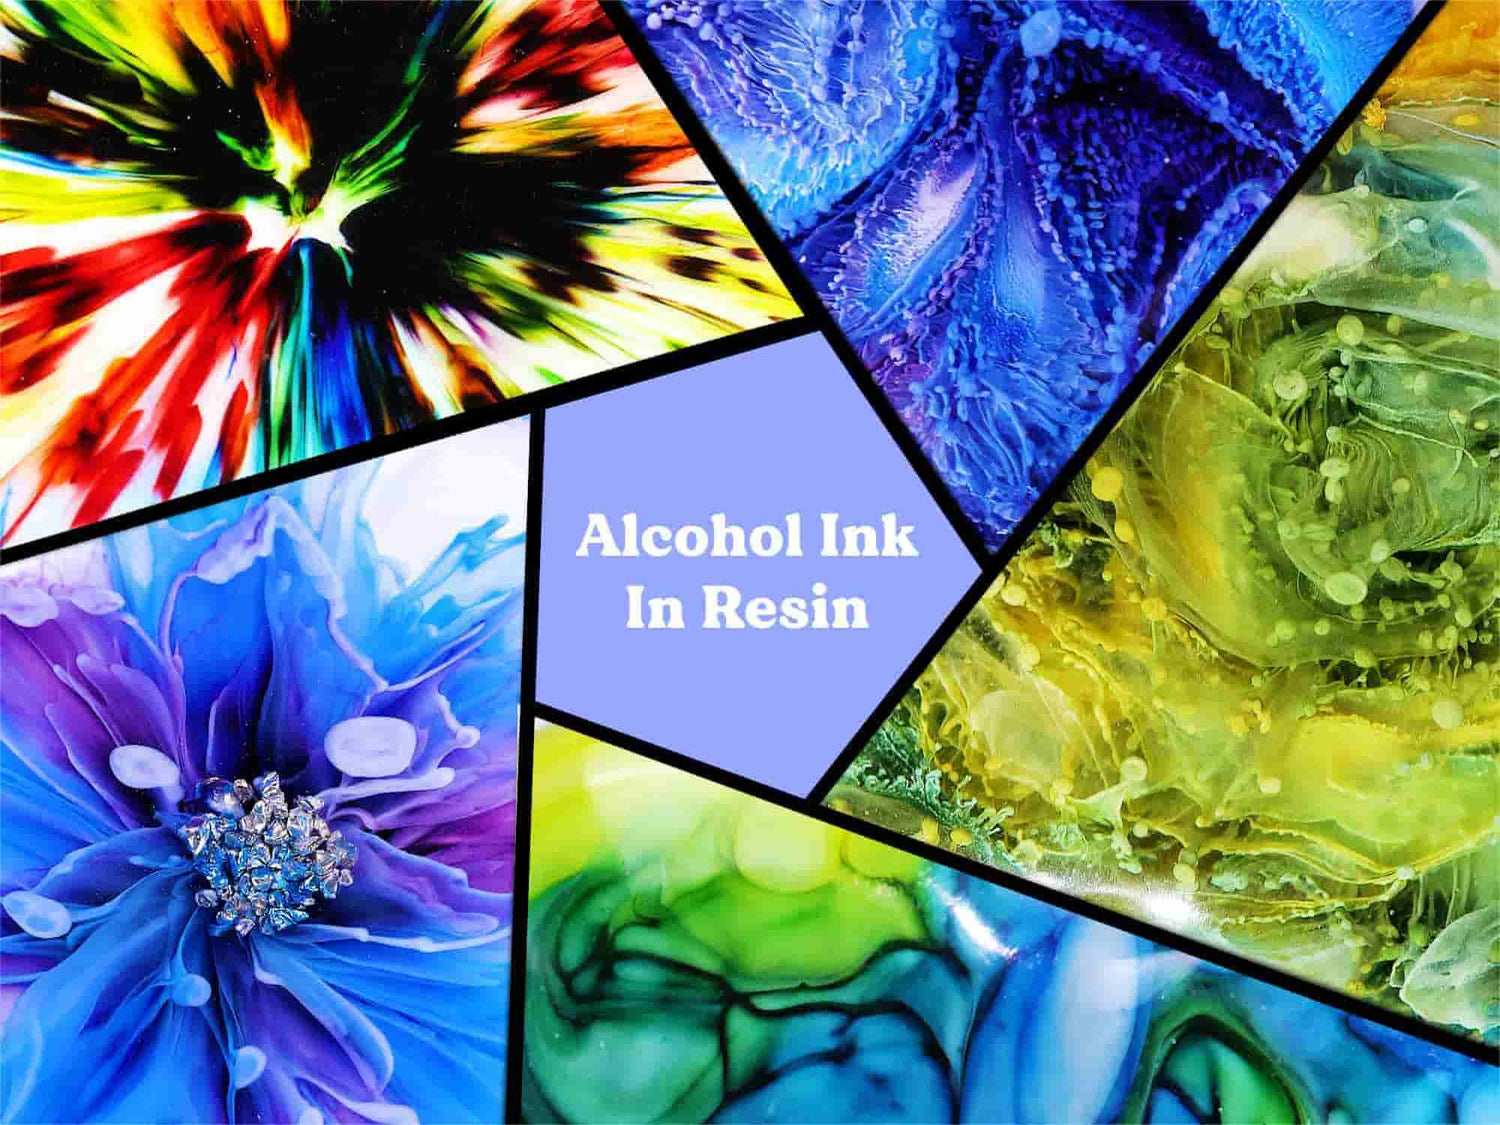 How to Use Alcohol Ink in Resin